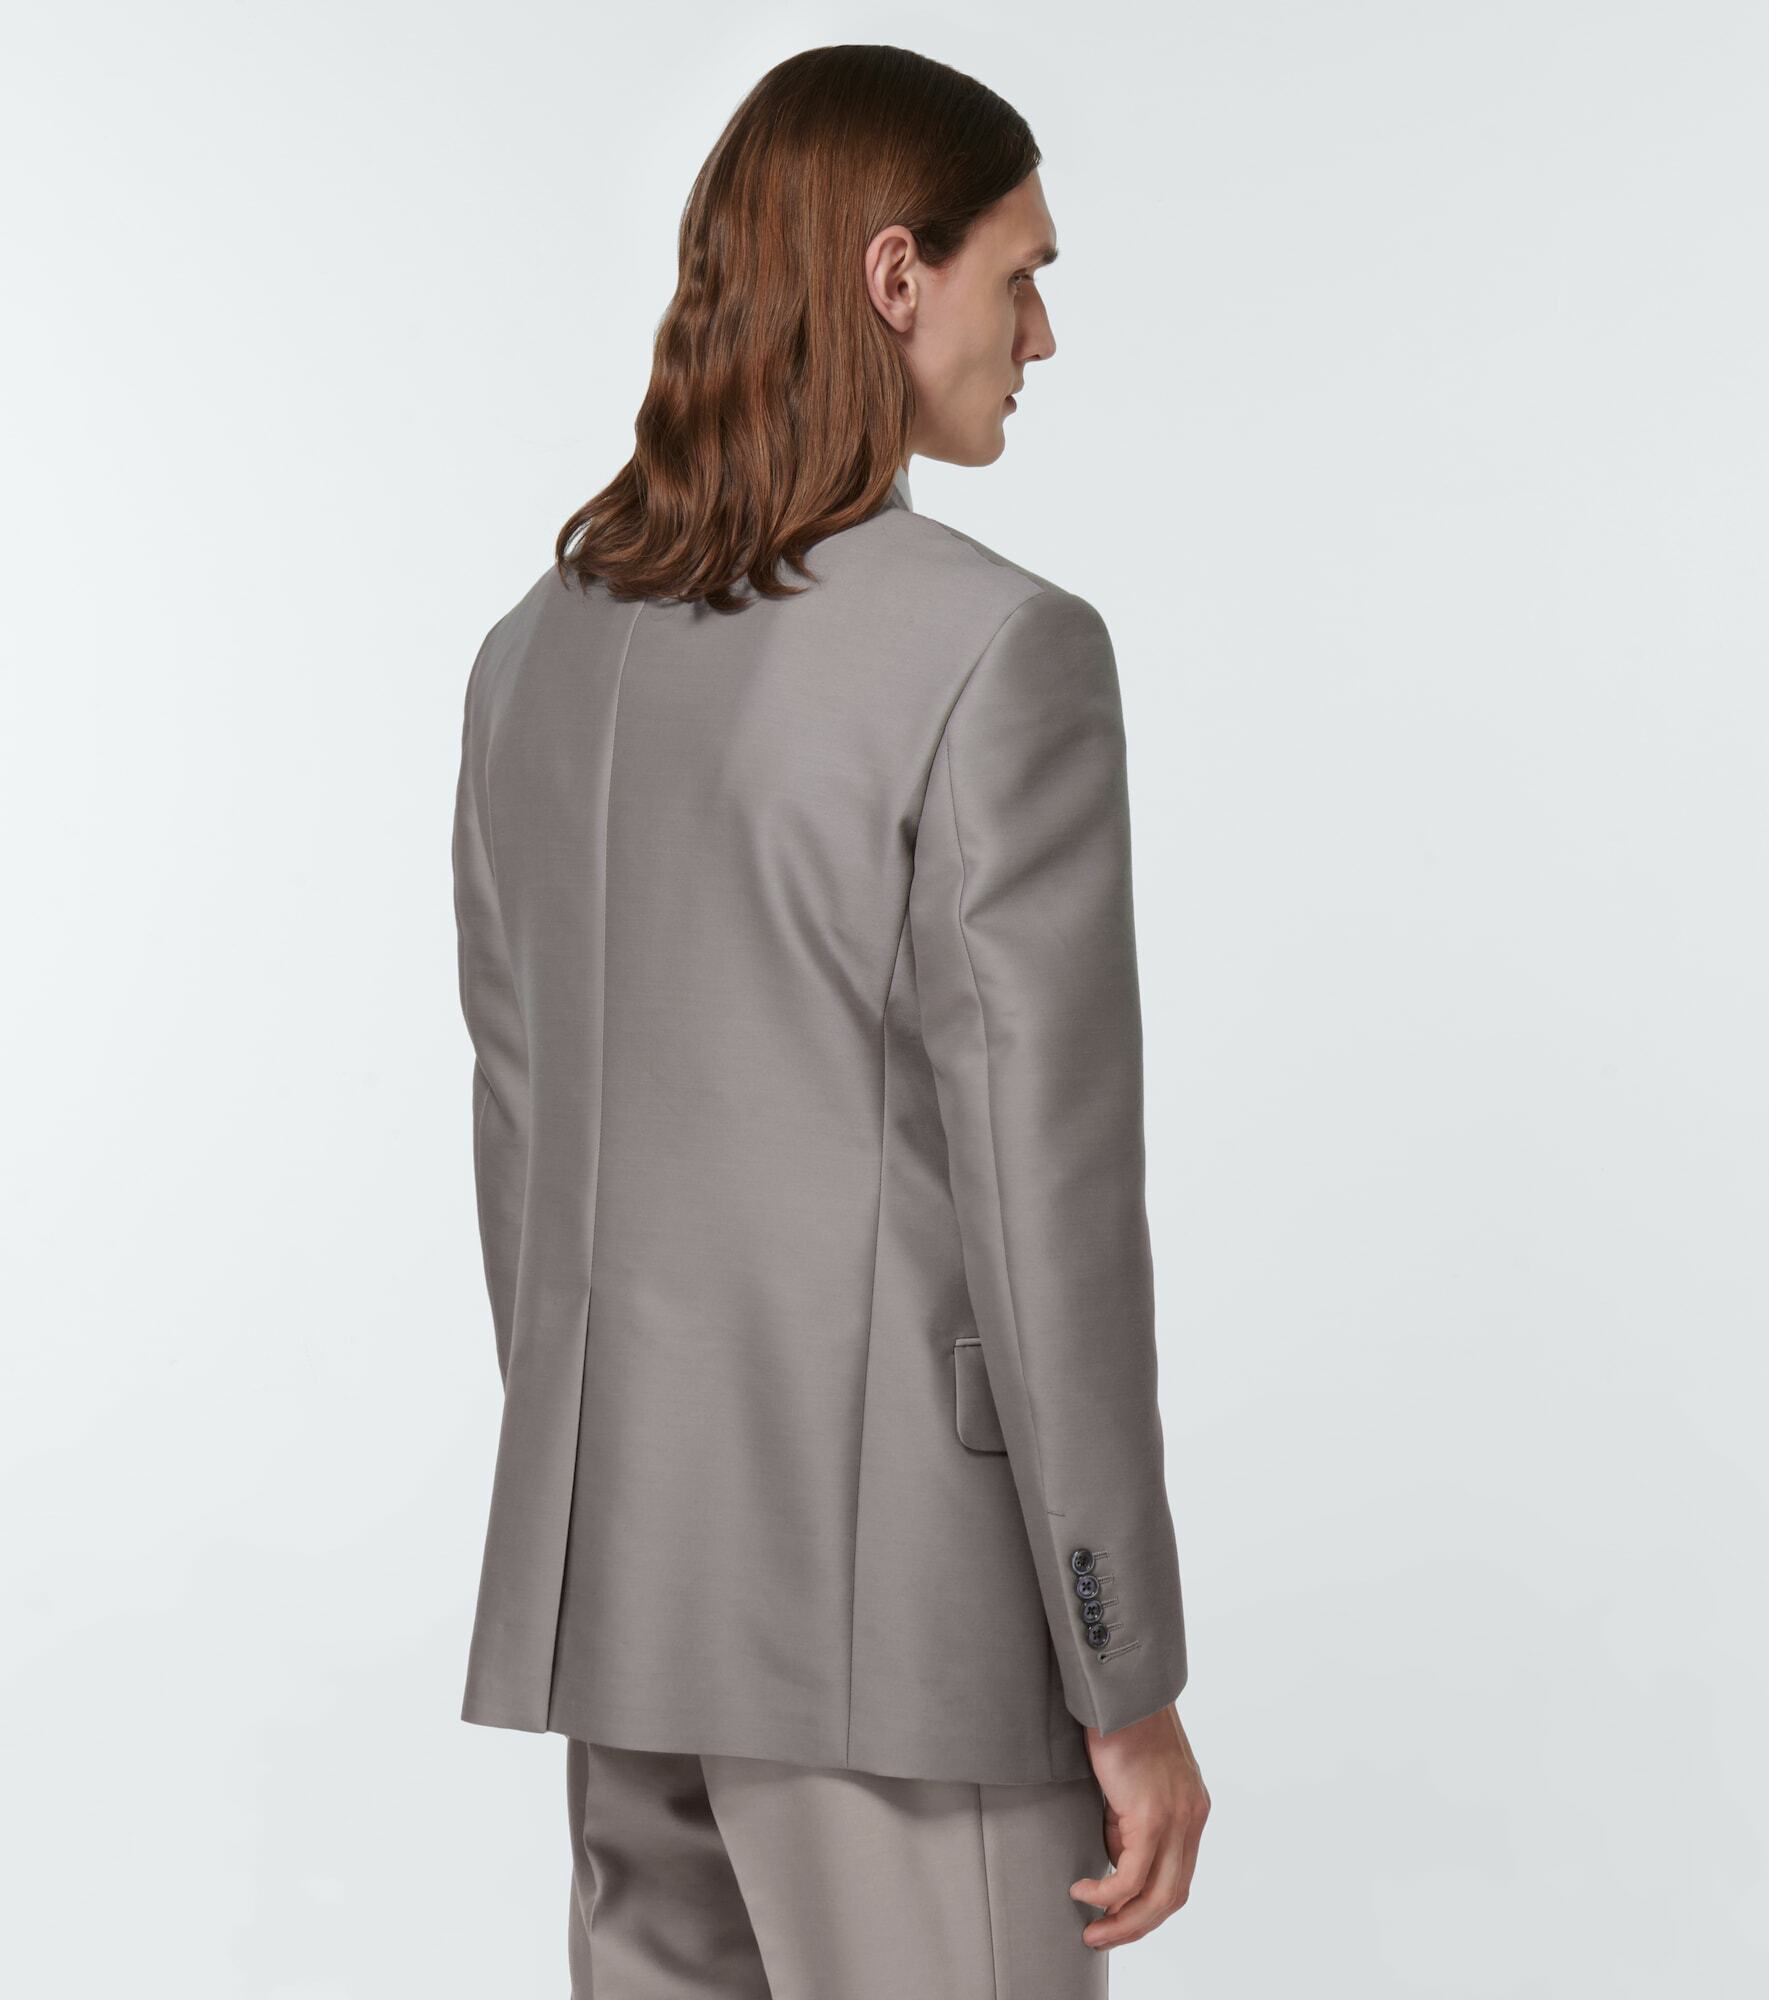 Tom Ford - Reverse twill organza suit jacket TOM FORD